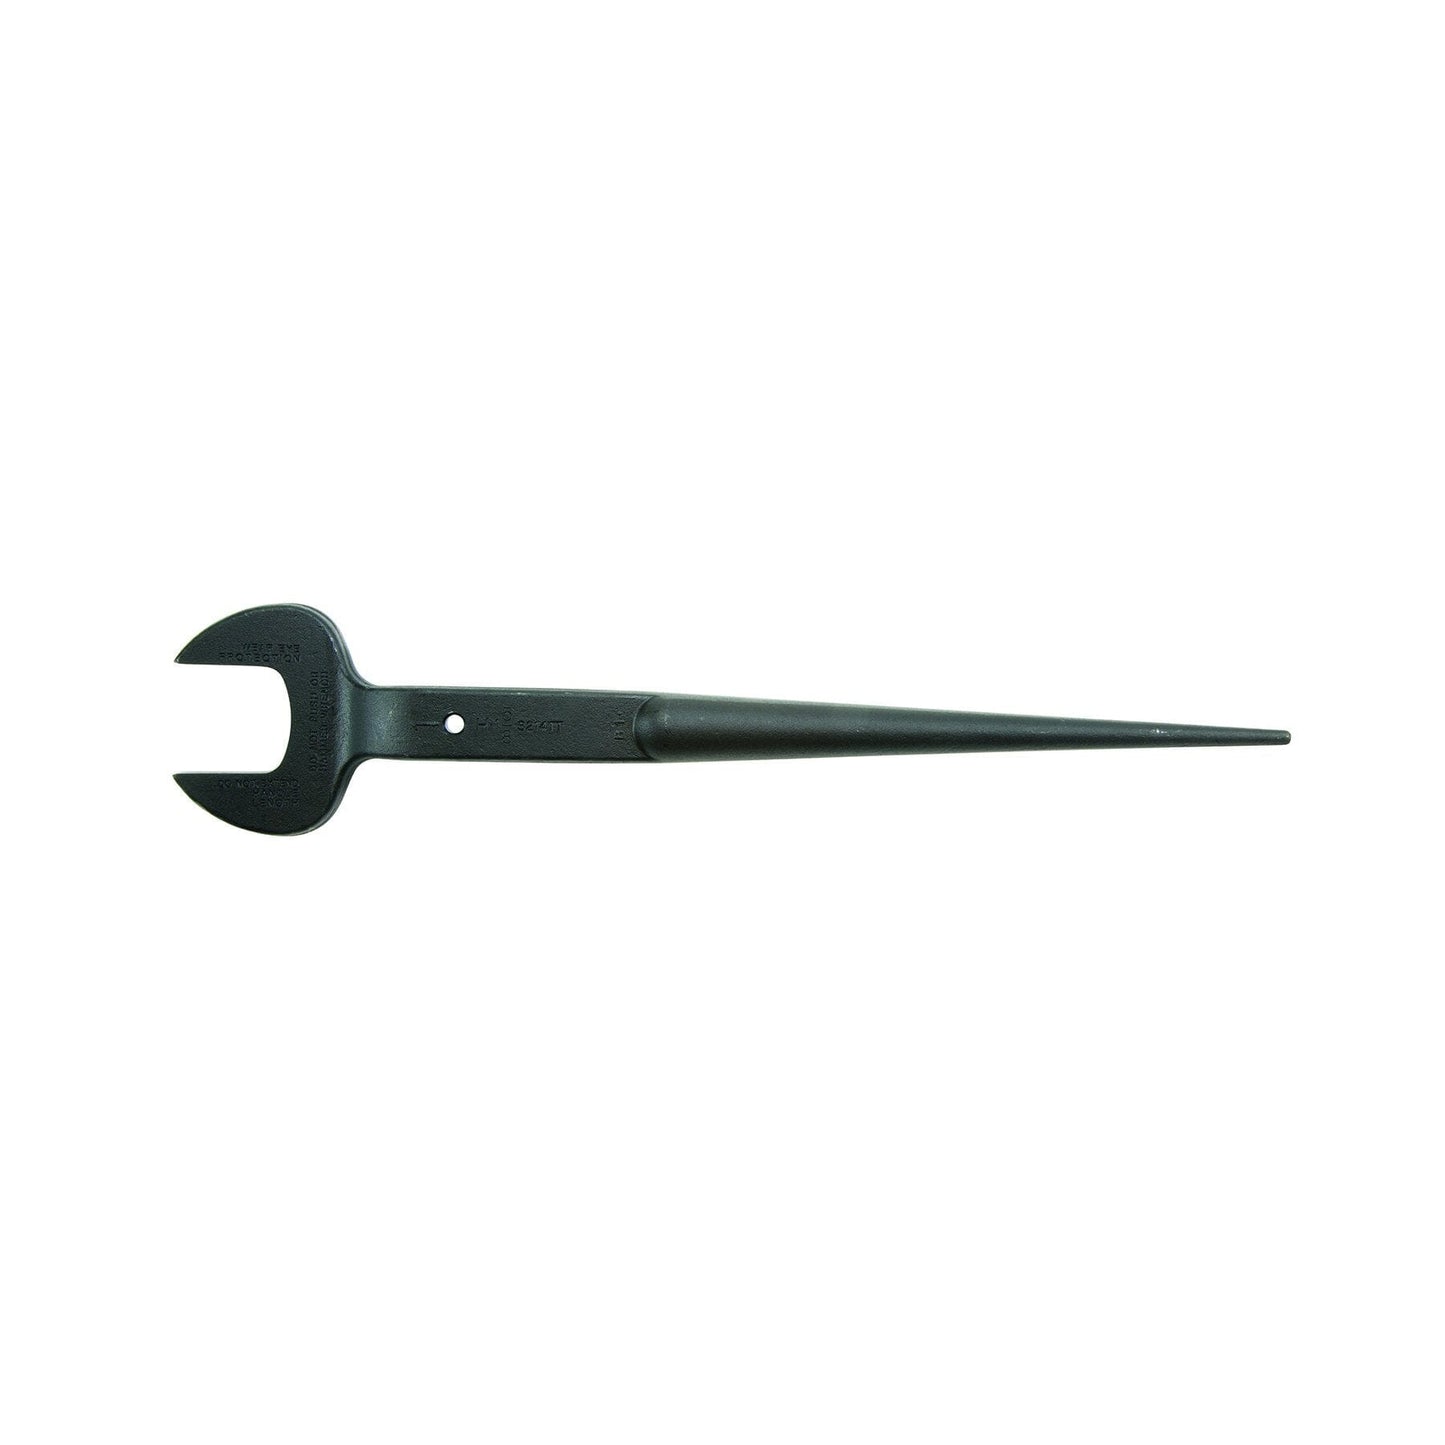 Klein Spud Wrench, 1'' Bolt, for U.S. Heavy Nut with Tether Hole - 3214TT Wrenches Klein Tools 